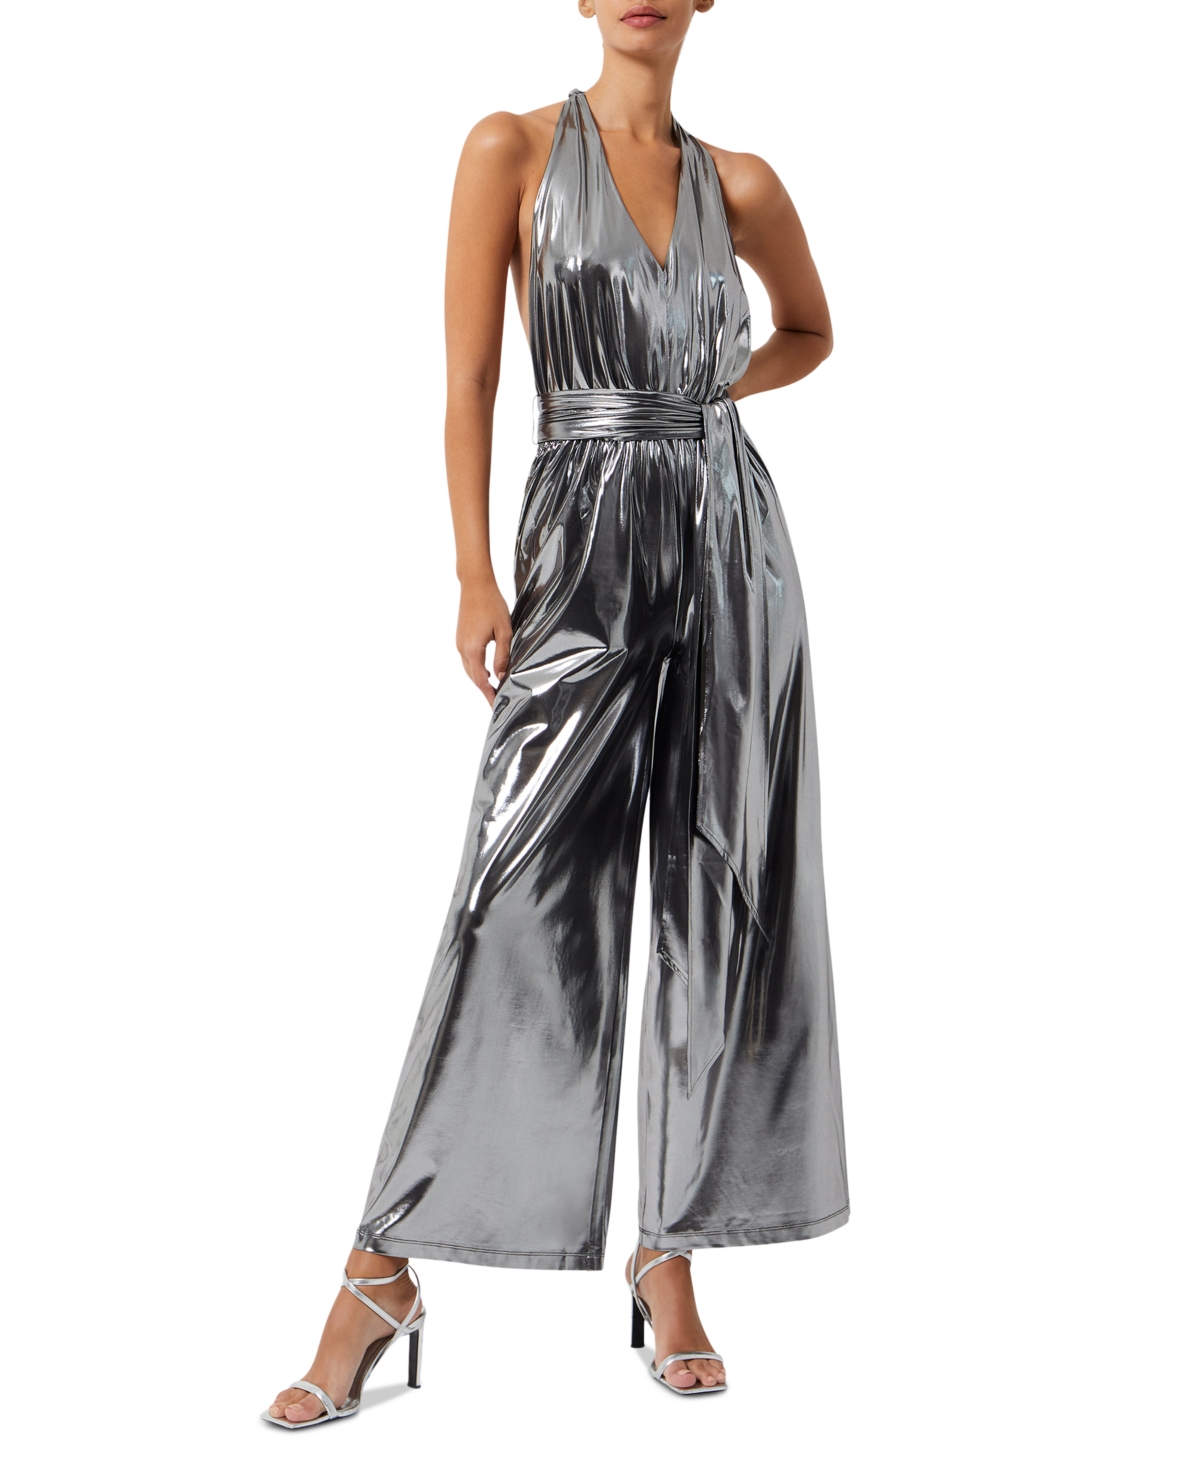 FRENCH CONNECTION WOMEN'S RONJA LIQUID METALLIC BACKLESS WIDE-LEG JUMPSUIT